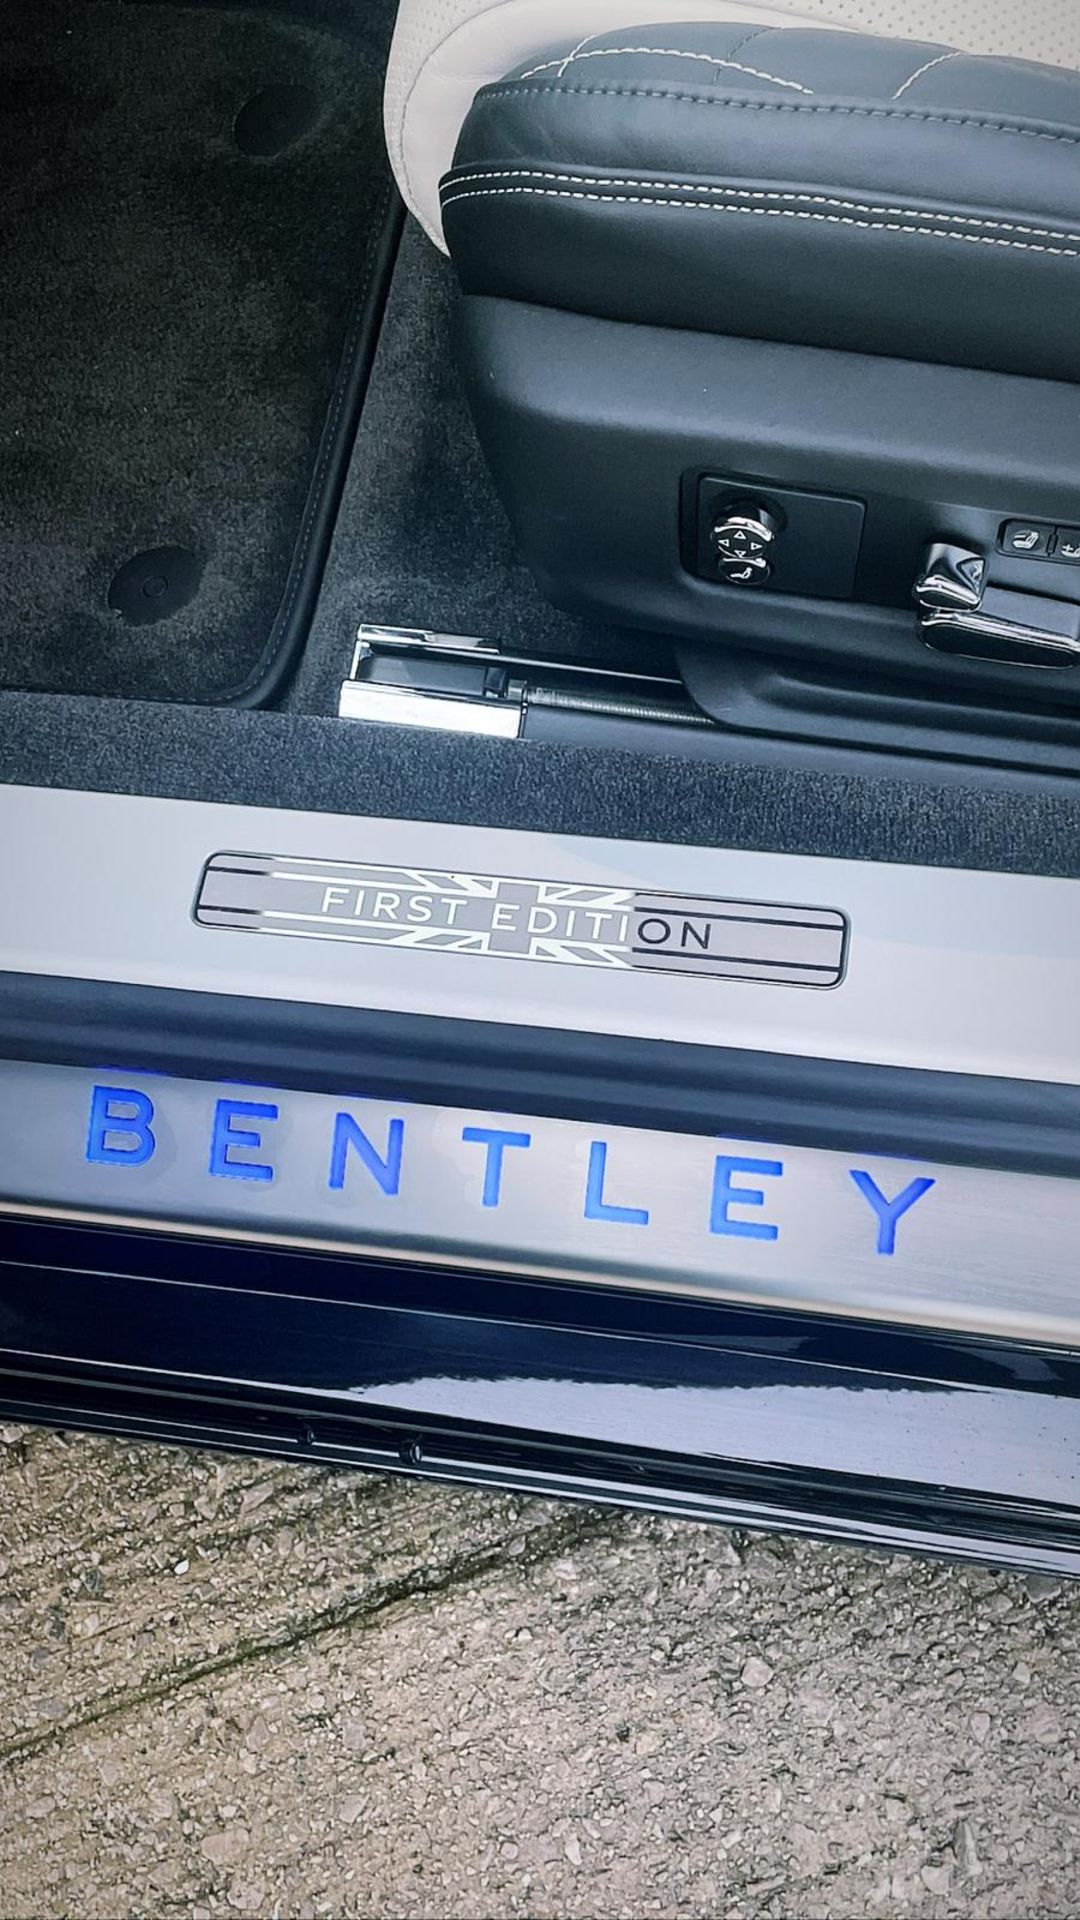 2018 BENTLEY CONTINENTAL GT 6.0 W12 1st EDITION AUTO, COMFORT SEATING, ONLY 8100 MILES *NO VAT* - Image 7 of 14